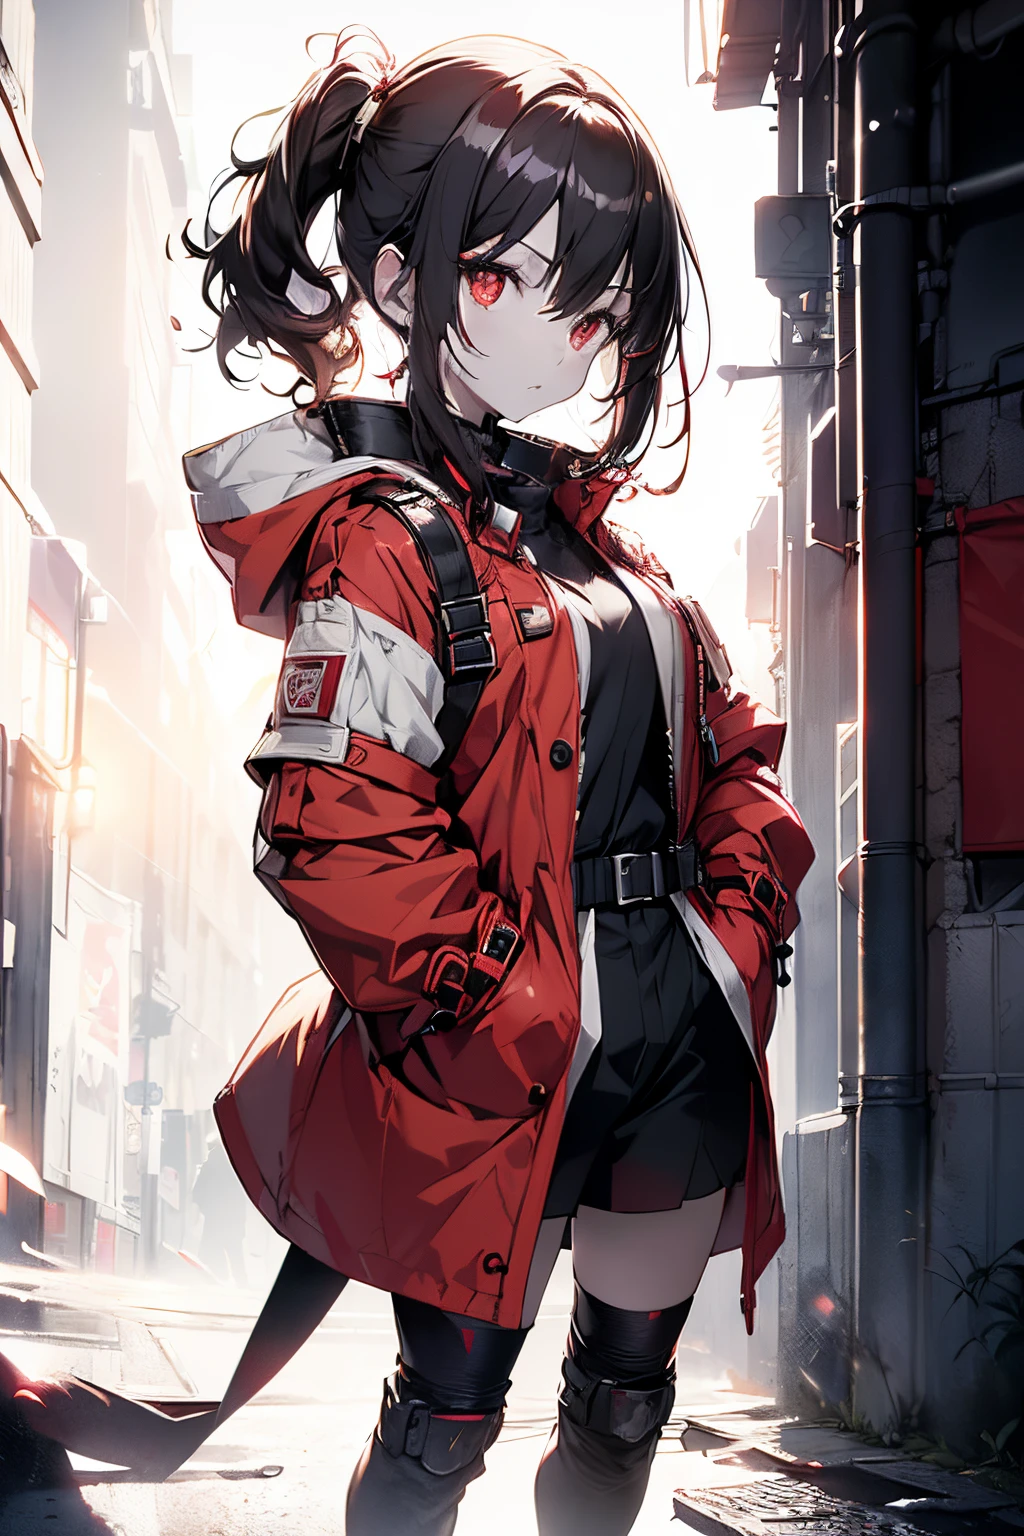 Full body, (masutepiece:1.2, Best Quality),(beautifull detailed face), High contrast, (Best Illumination, Extremely delicate and beautiful), ((Cinematic Light)), Dramatic light, Intricate details,(Pale white background:1.5), oversized red coat, Hands in pockets, Black hair, Red Eyes, body harnesses, Side tail hair,black military uniform, black skirt